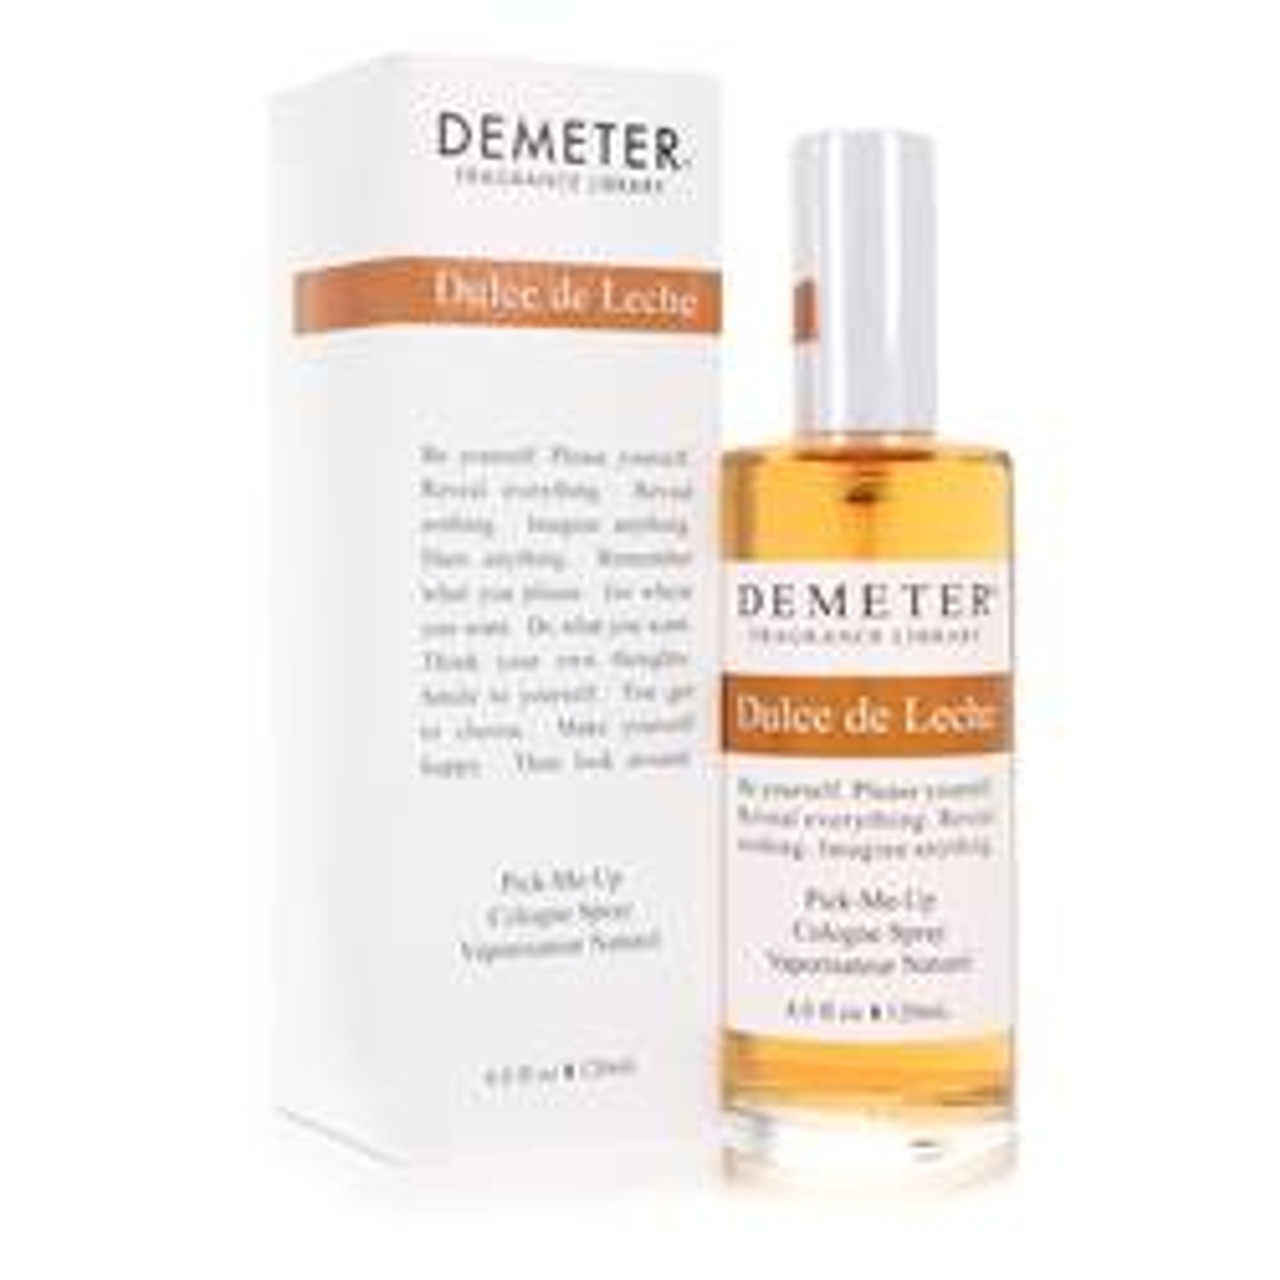 Demeter Dulce De Leche Perfume By Demeter Cologne Spray 4 oz for Women - [From 79.50 - Choose pk Qty ] - *Ships from Miami